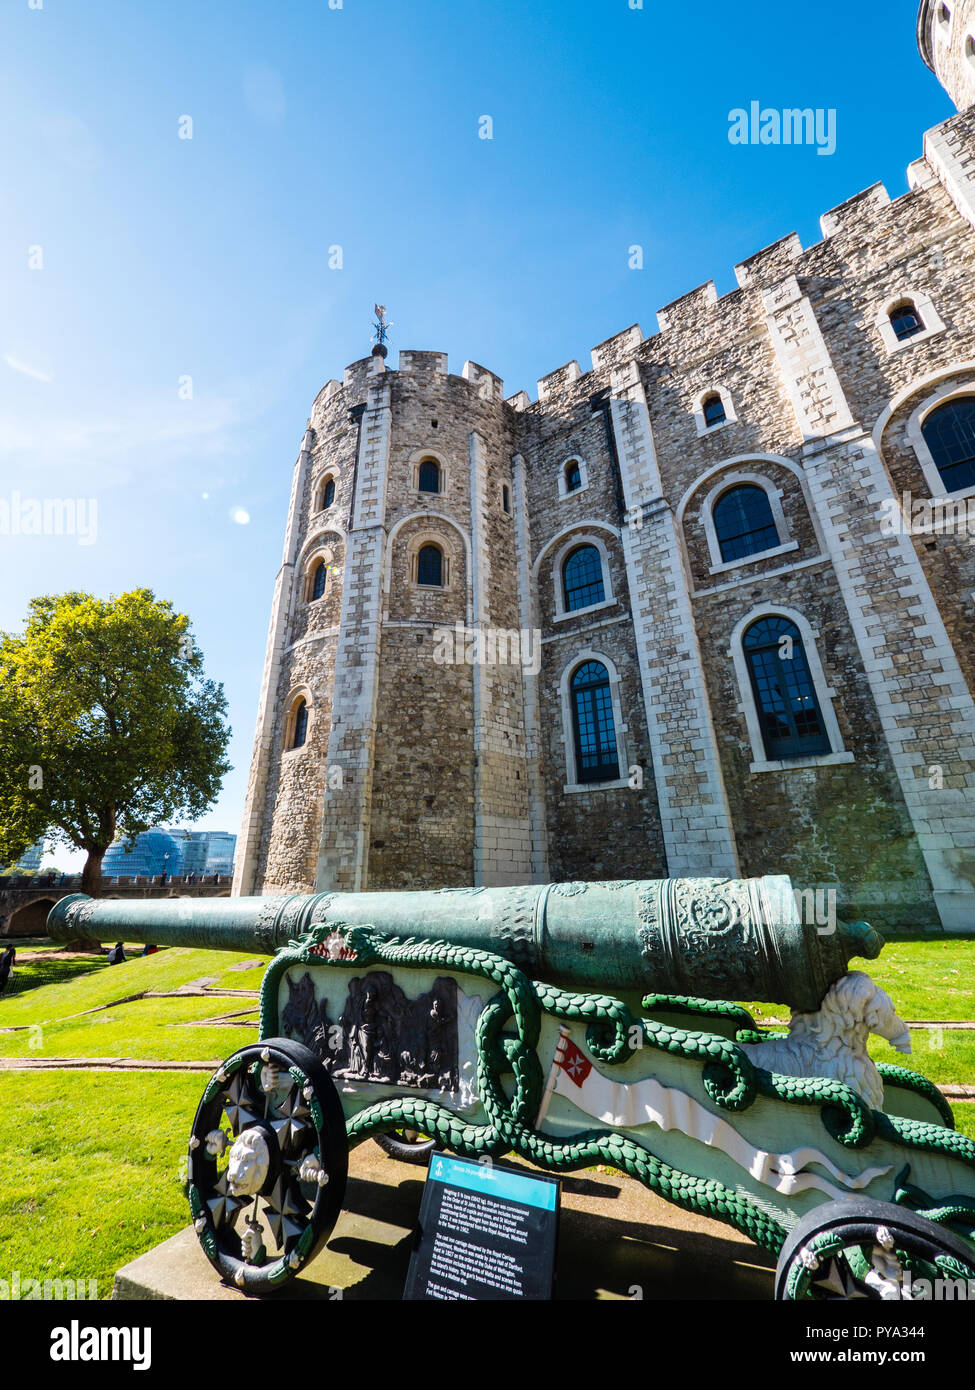 Dragon Cannon, in front of White Tower, Tower of London, England, UK, GB. Stock Photo